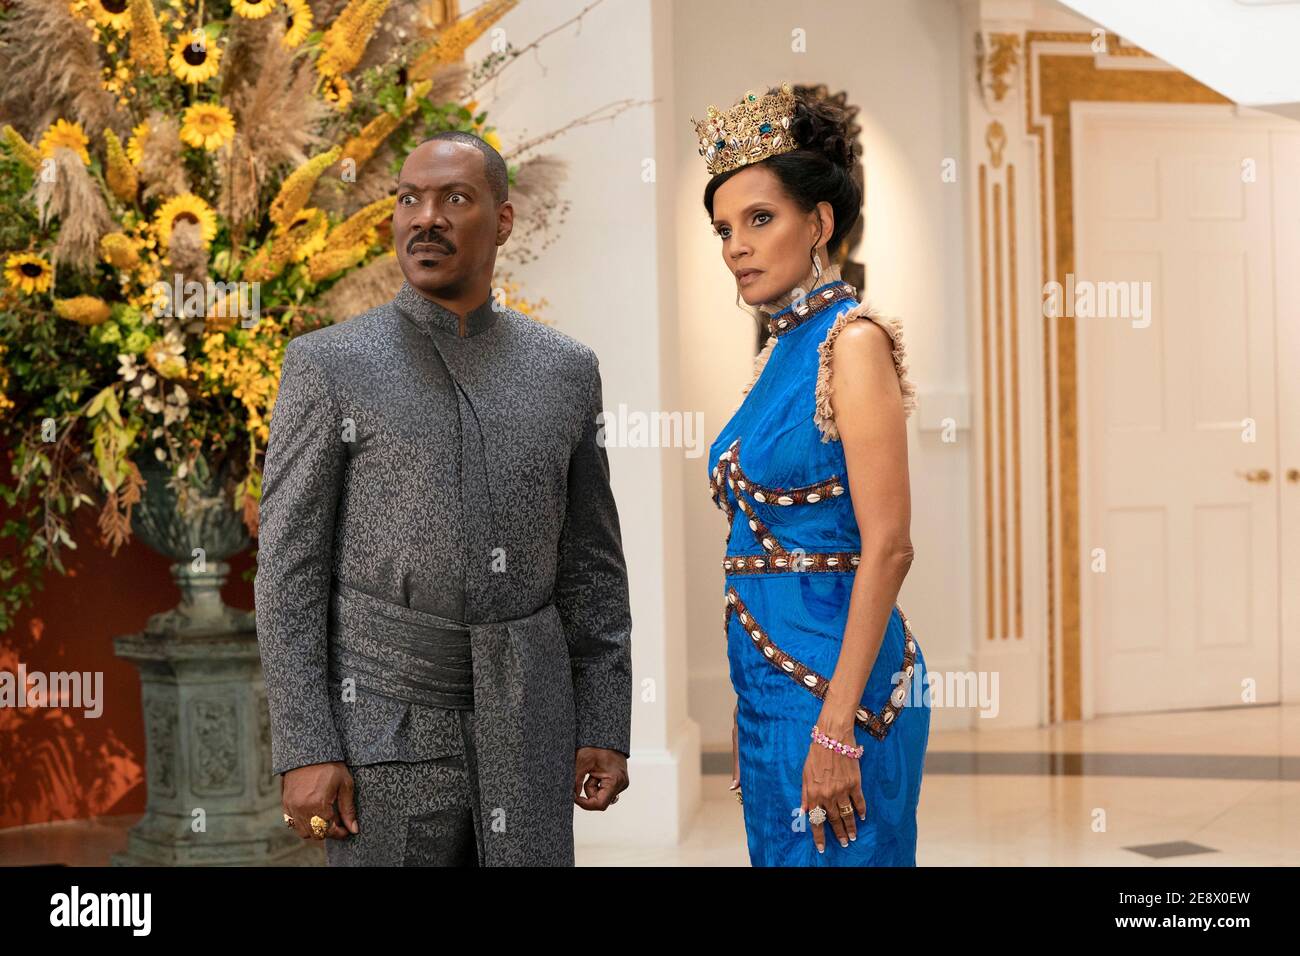 USA. Eddie Murphy and Shari Headley in a scene from ©Amazon Studios new film:  Coming 2 America (2021) Plot: The African monarch Akeem learns he has a  long-lost son in the United